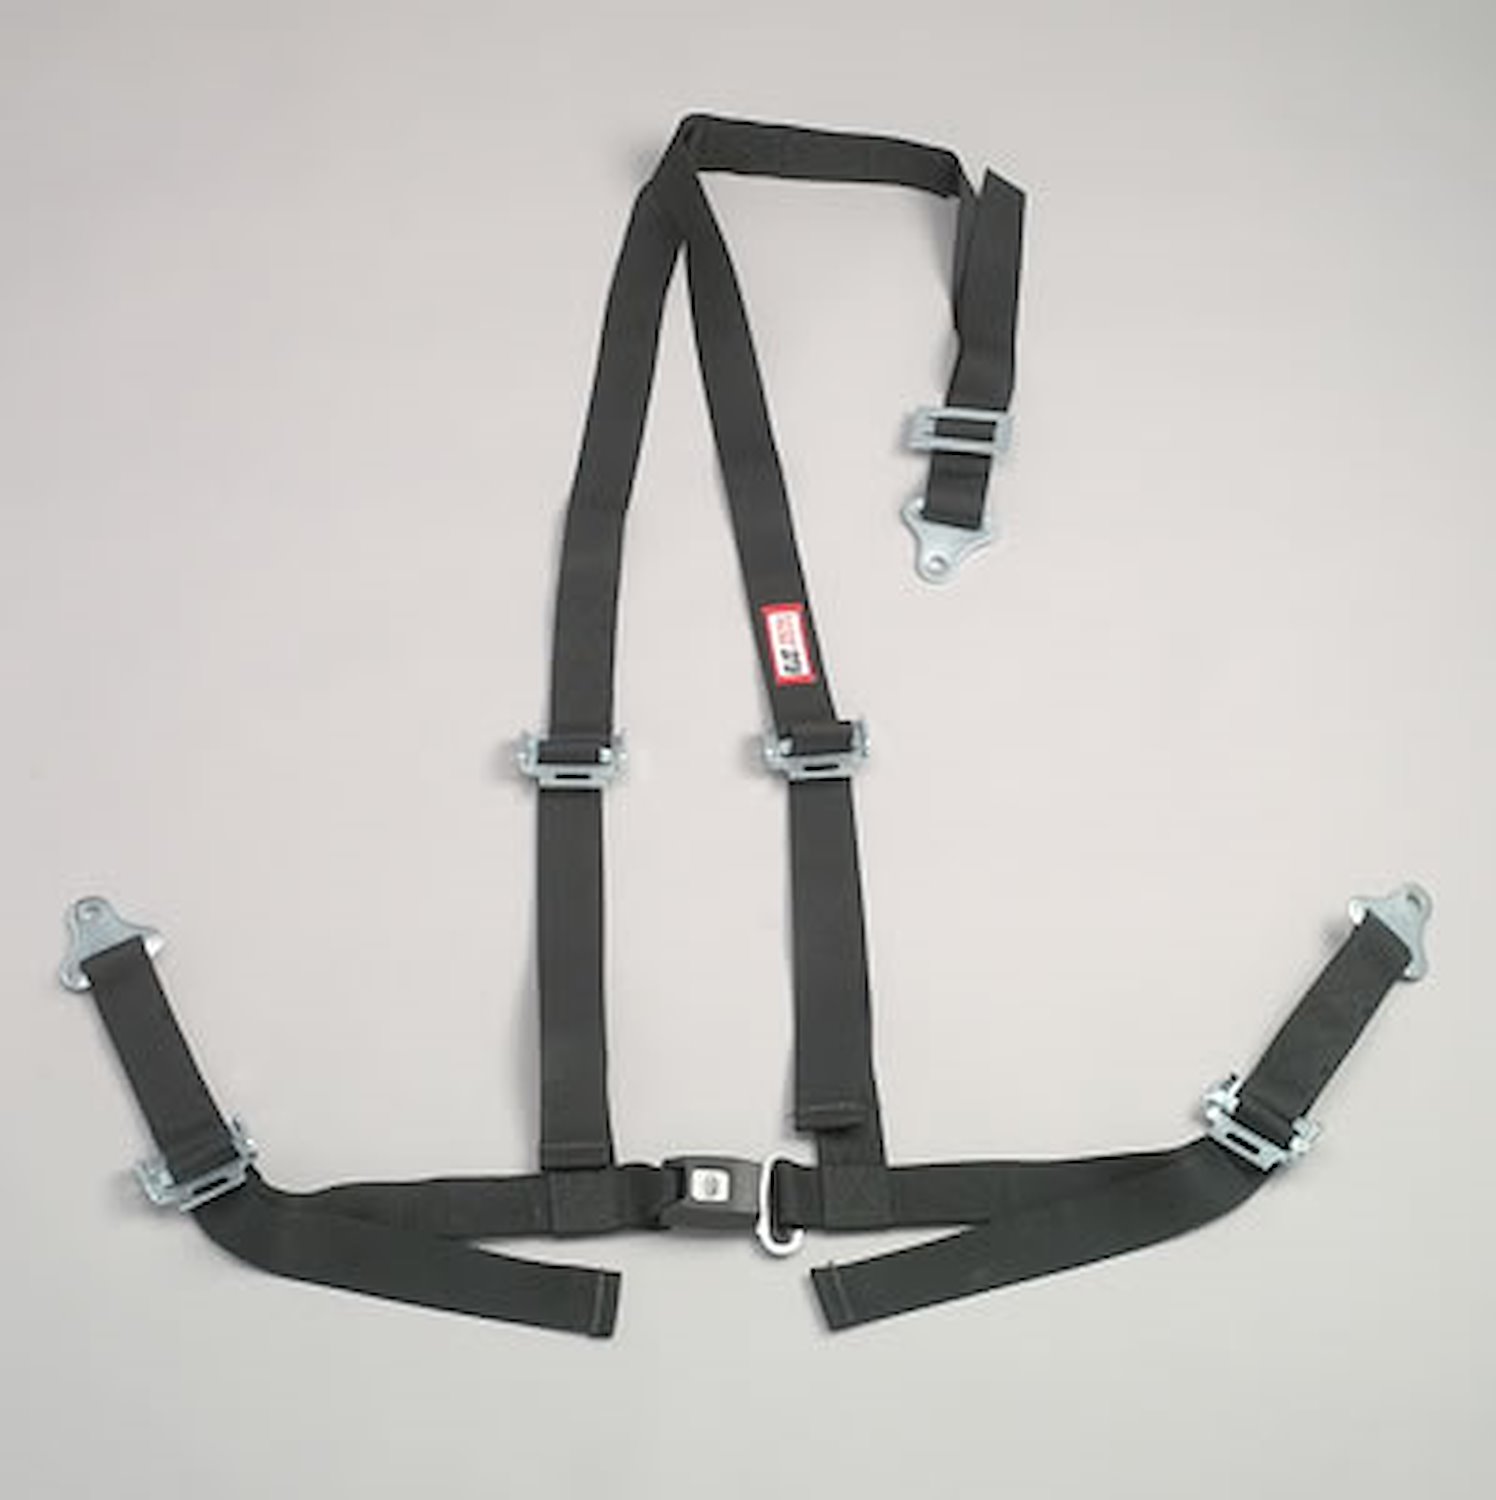 NON-SFI B&T HARNESS 2 PULL DOWN Lap Belt SNAP 2 S. H. Individual ROLL BAR Mount WRAP/BOLT w/STERNUM STRAP RED